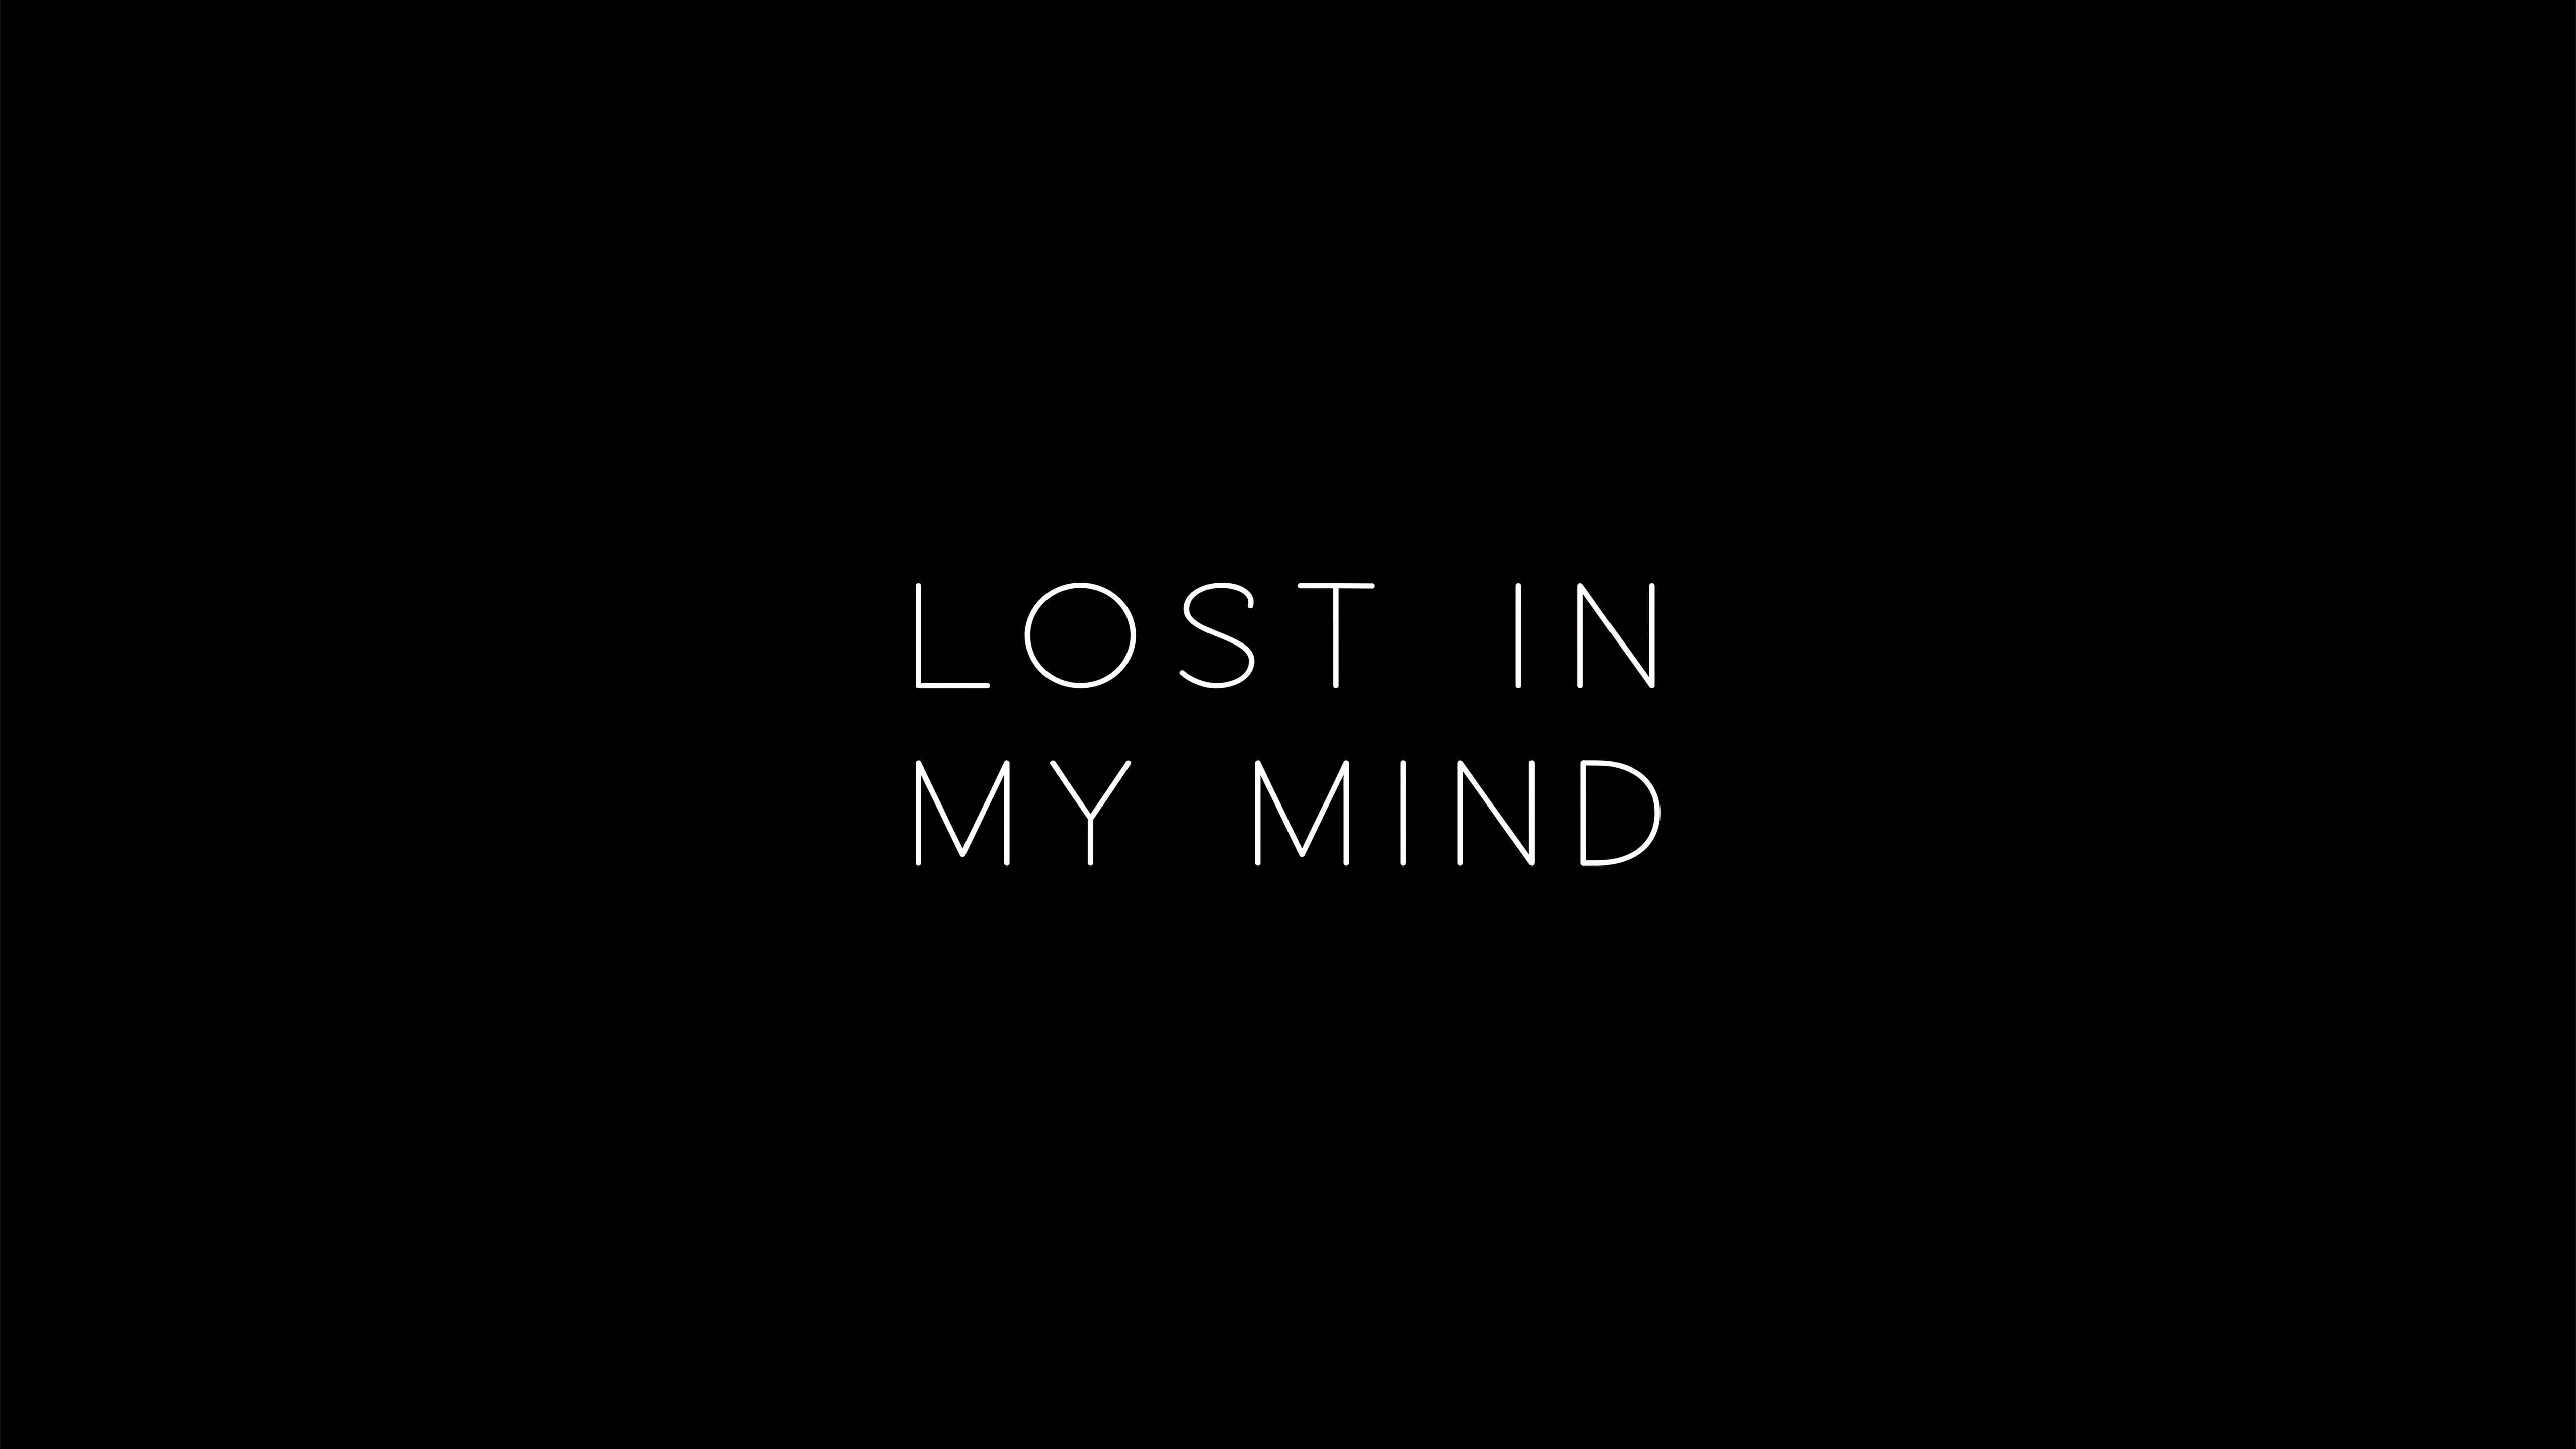 Where is my mind текст. Lost my Mind. Картинка LOSTMINE. Lost in Mind обои. On my Mind обои на рабочий стол.